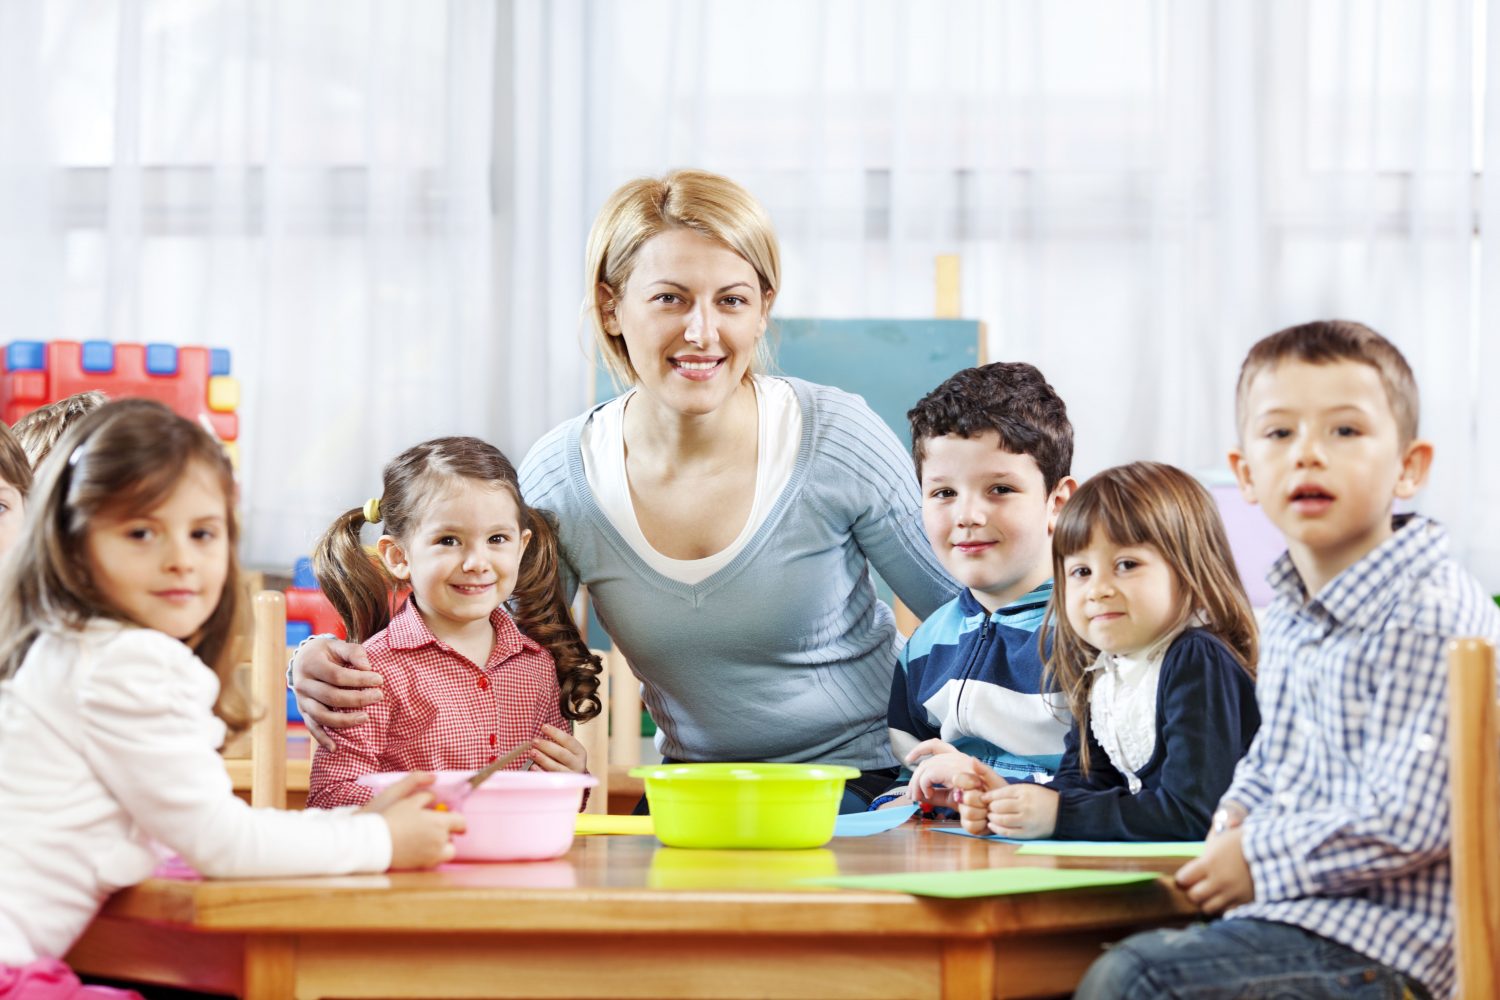 Start your career in child care